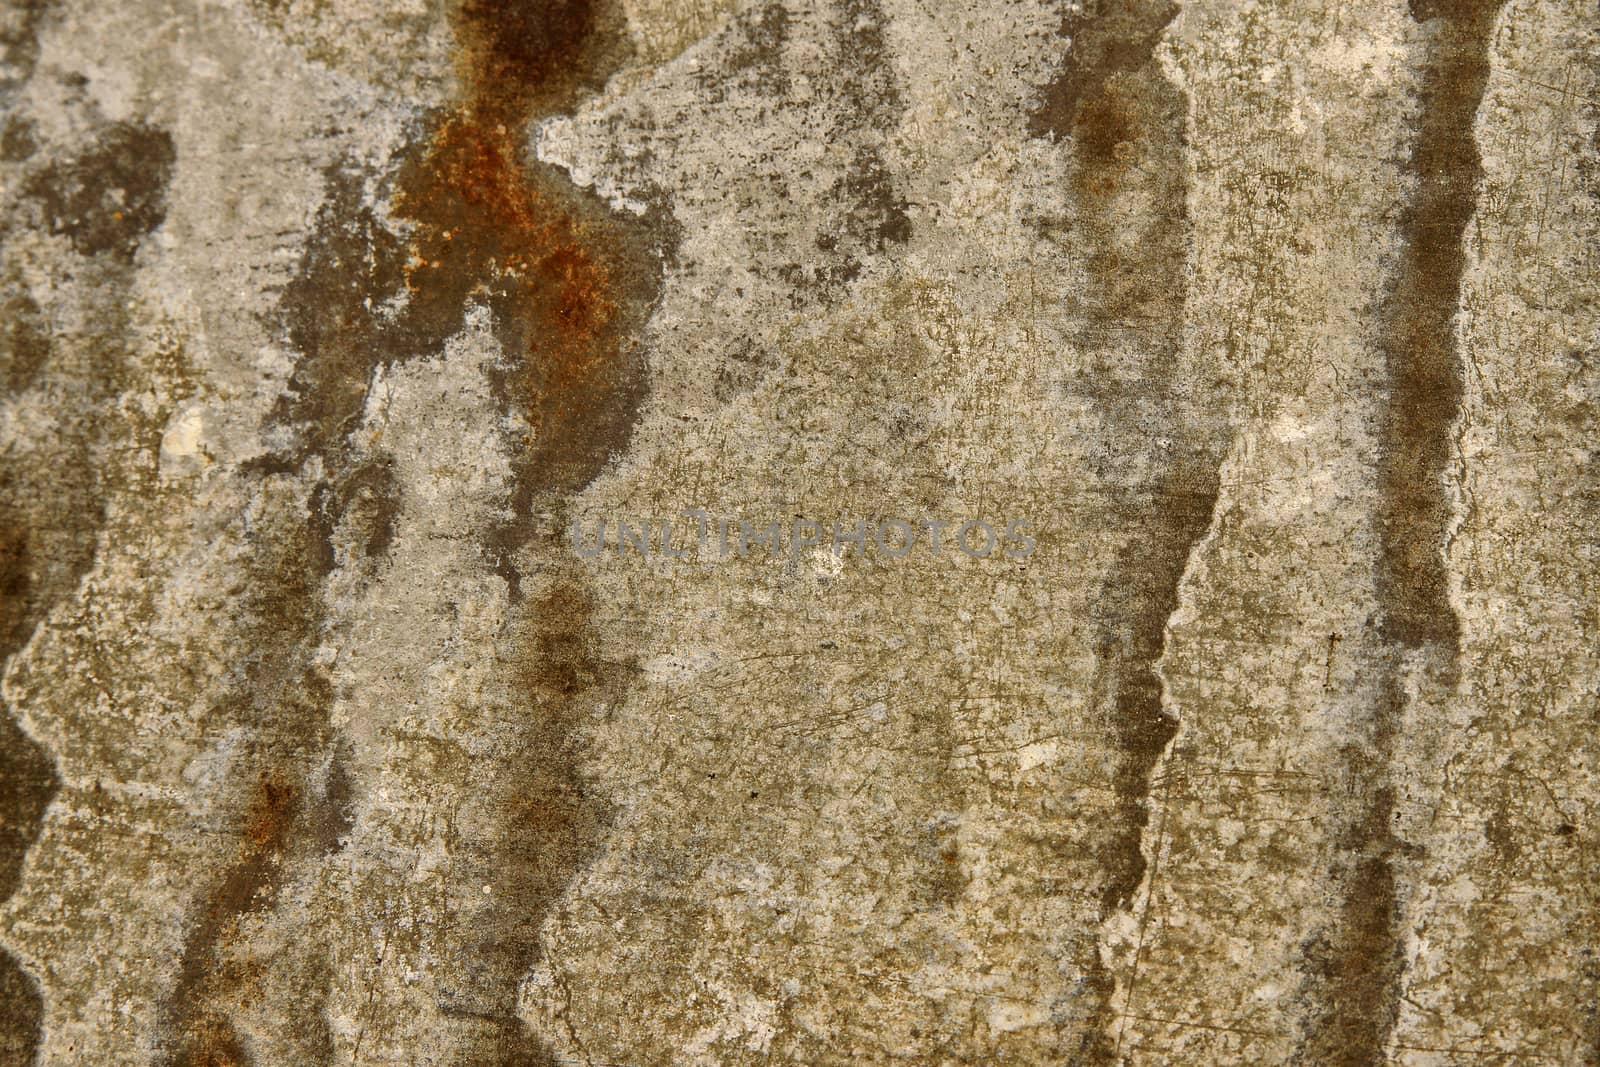 Close up photo of old rusty galvanized iron sheet texture.